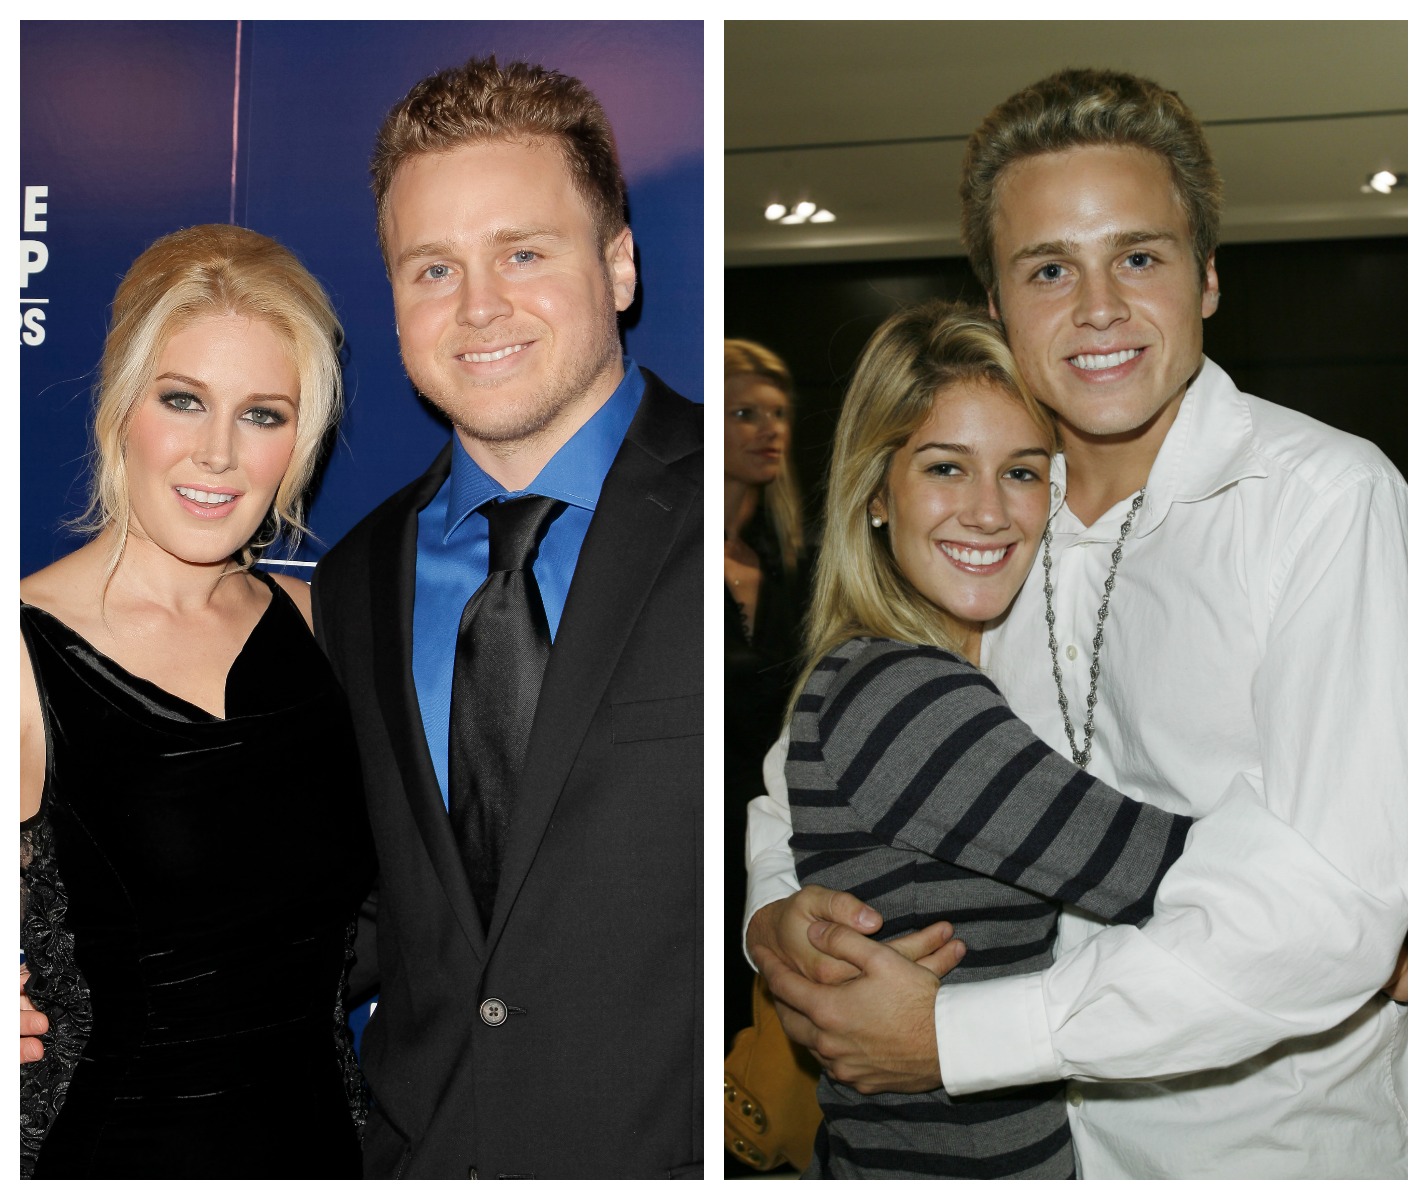 Spencer Pratt and Heidi Montag give marriage advice